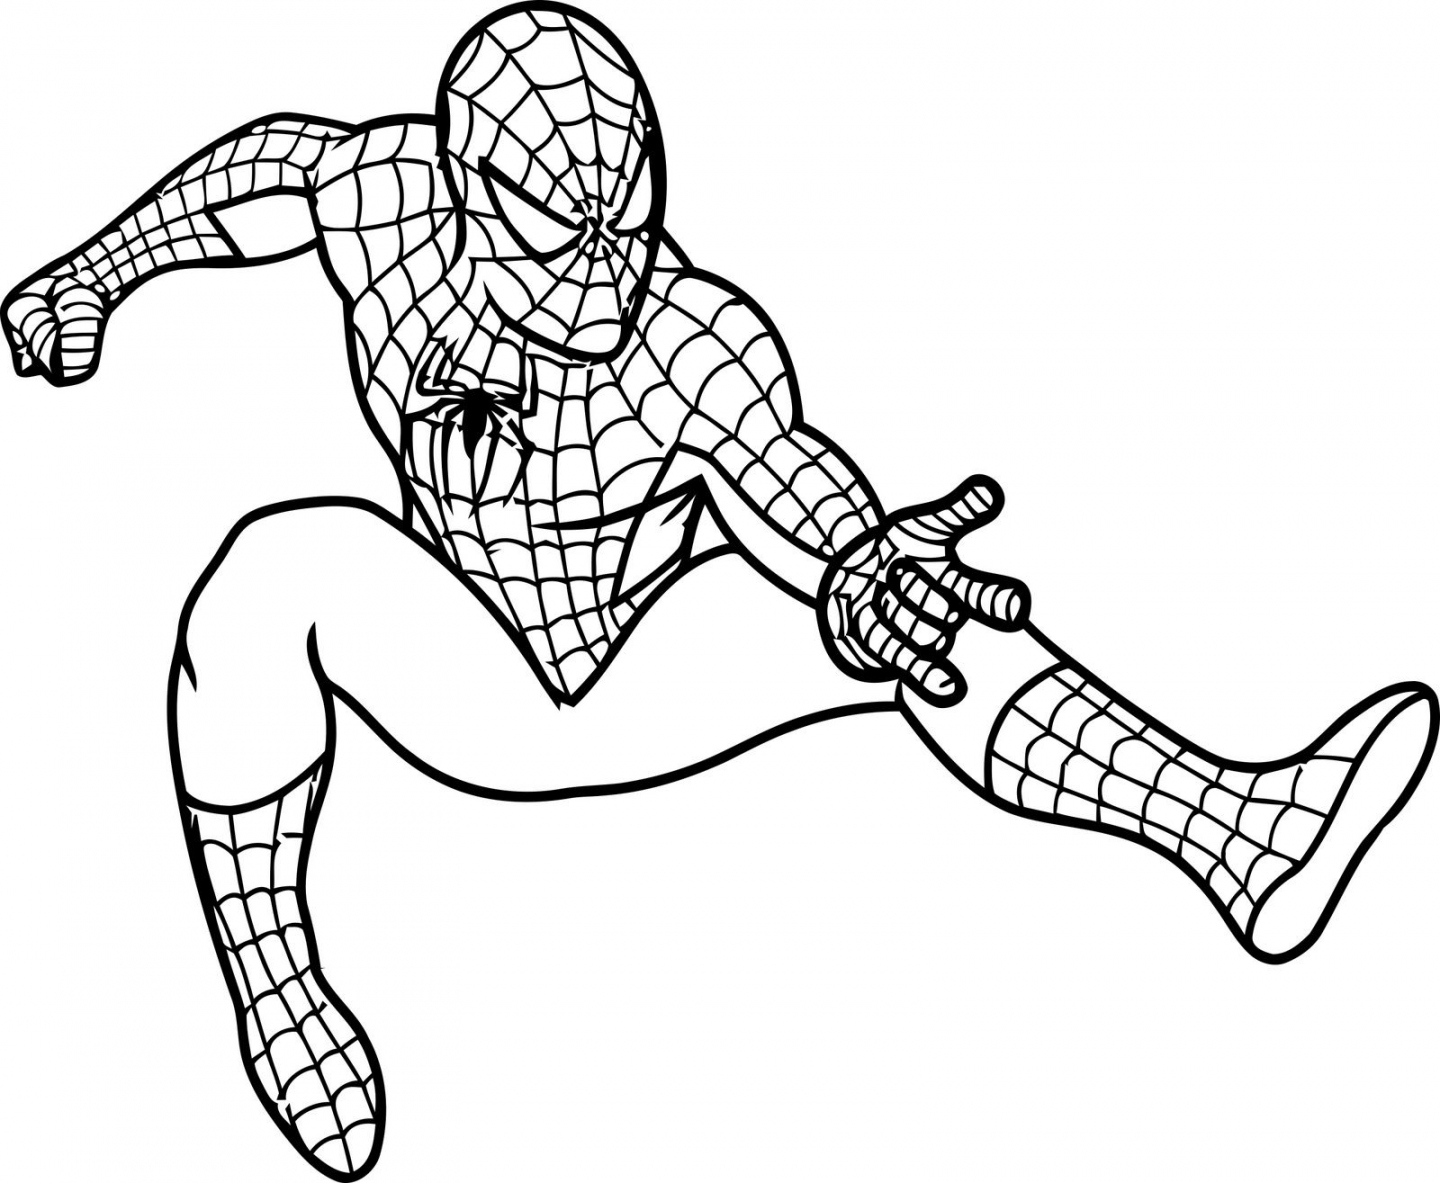 Spider Man Free Printable Coloring Pages - Printable - Pin on Projects to Try